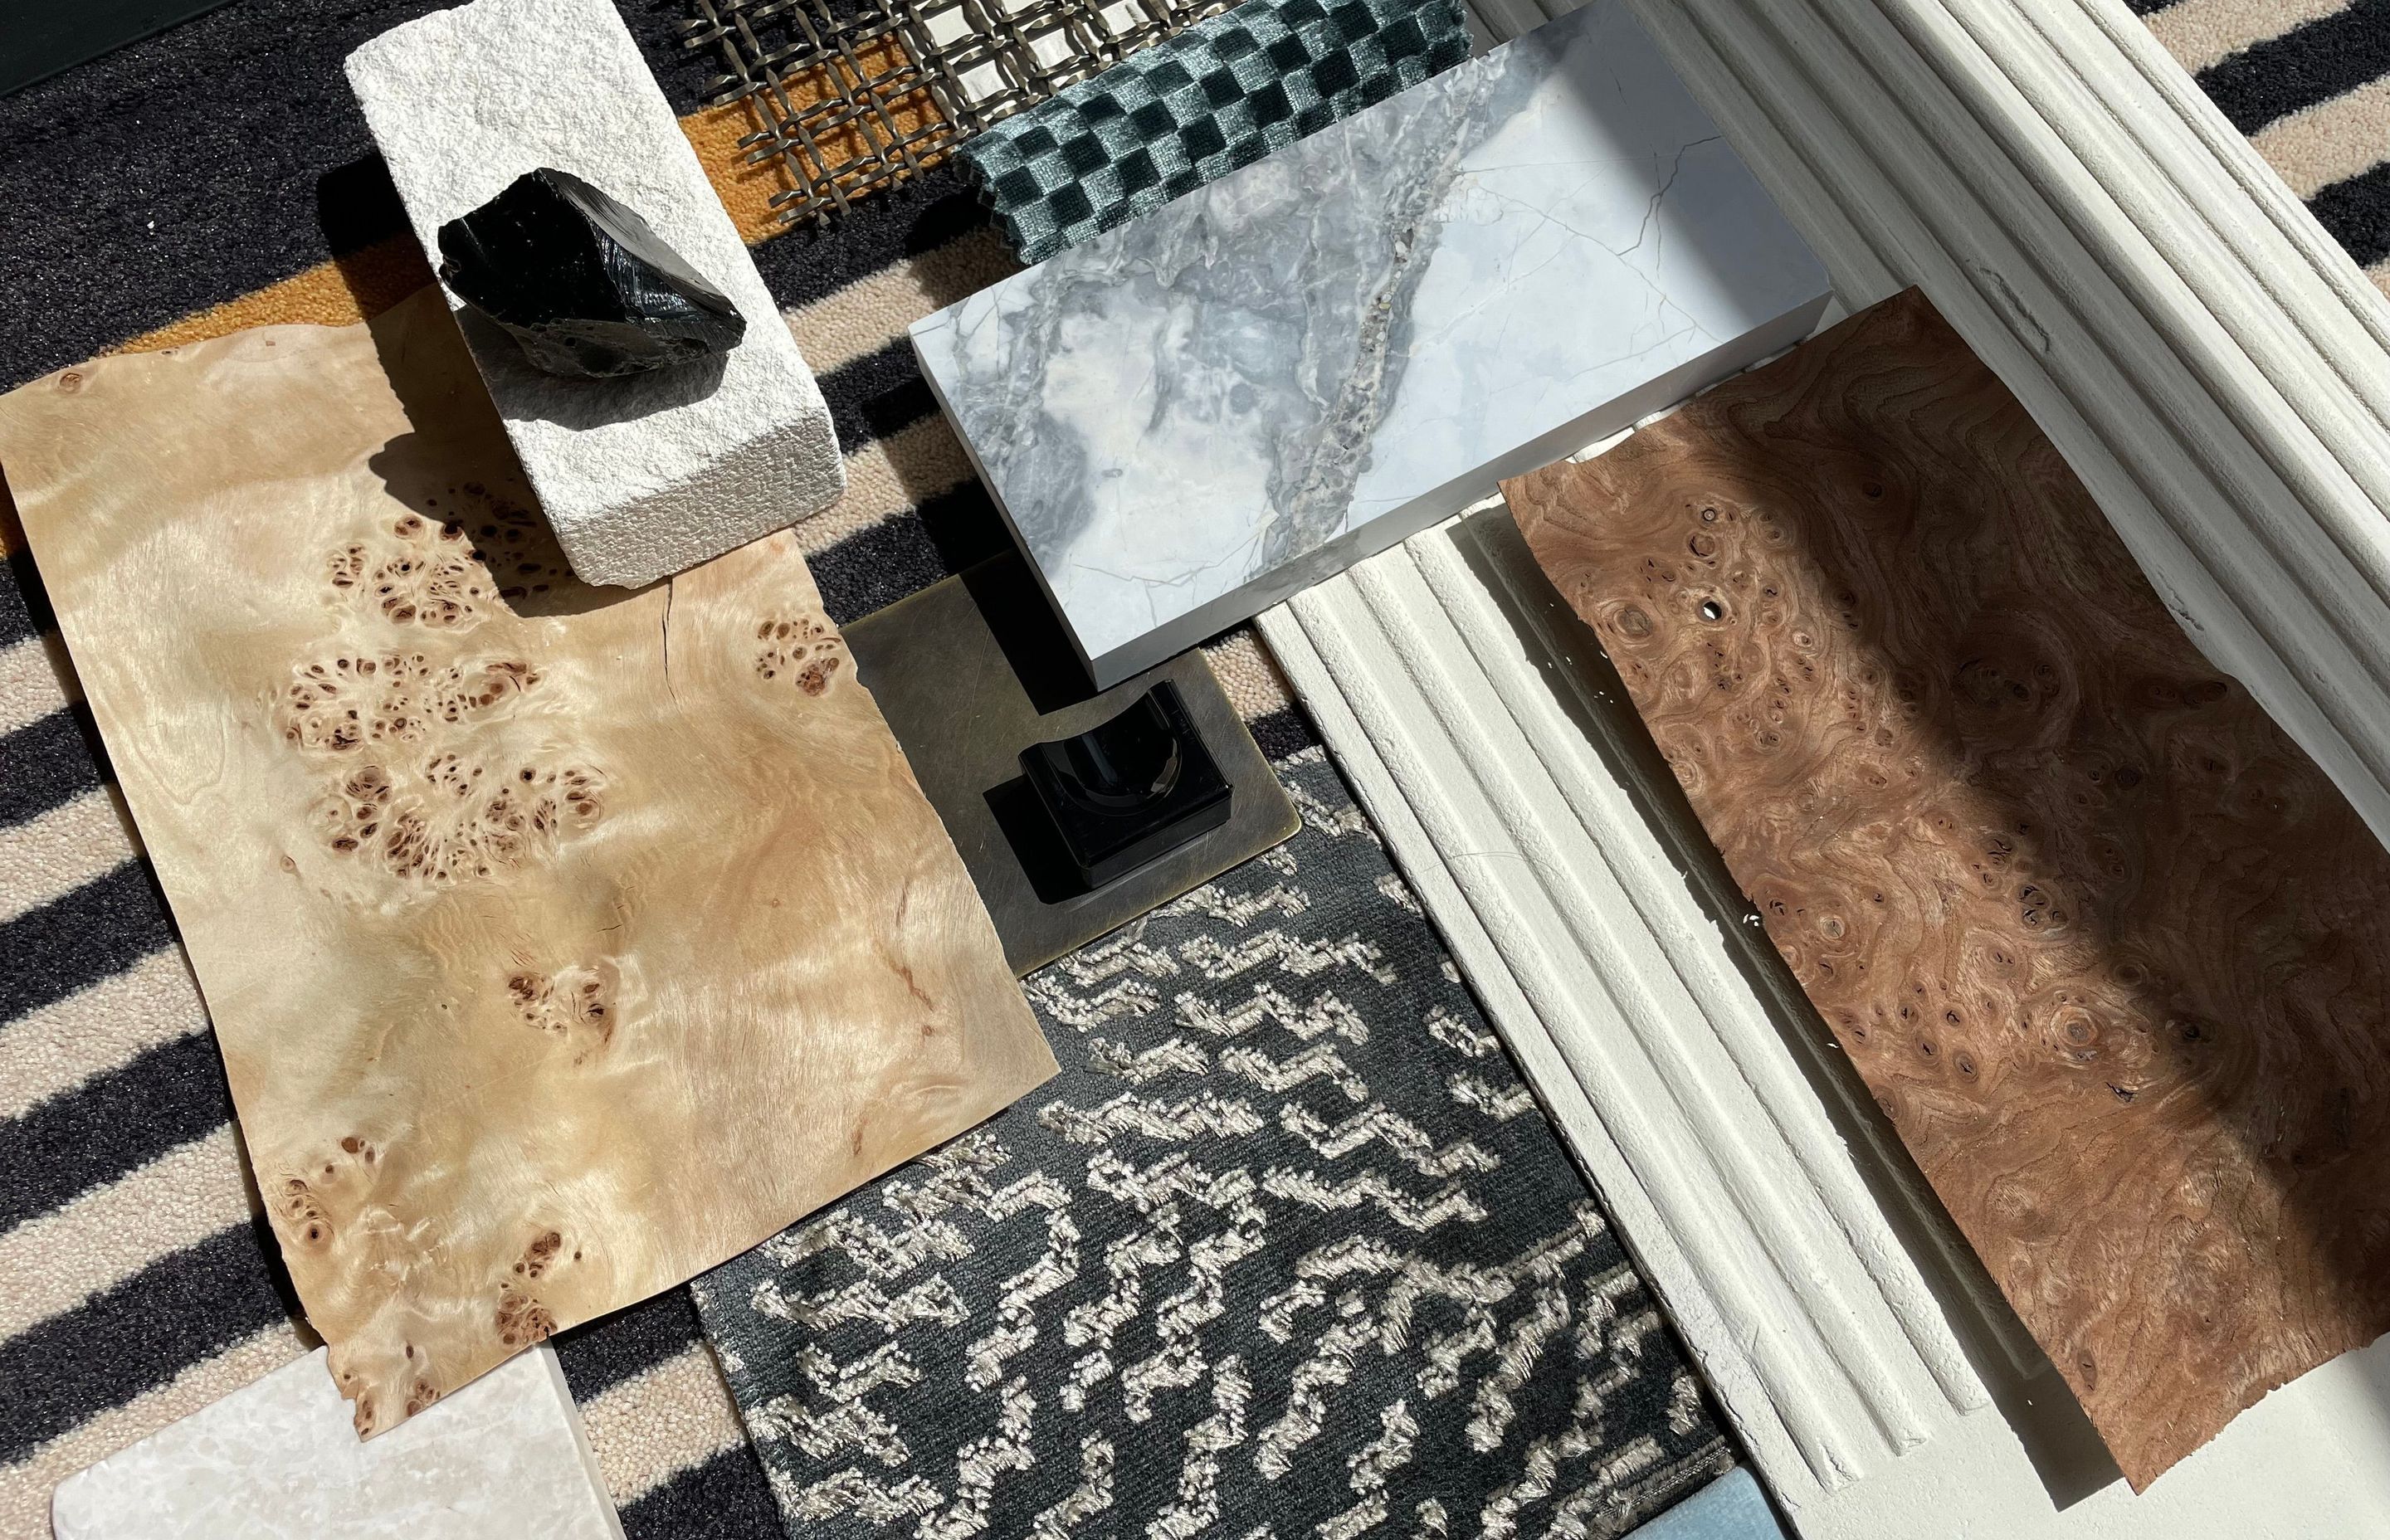 This textural and authentic board was styled by Liv Patience and Toni Brandso with an upcoming project in mind.